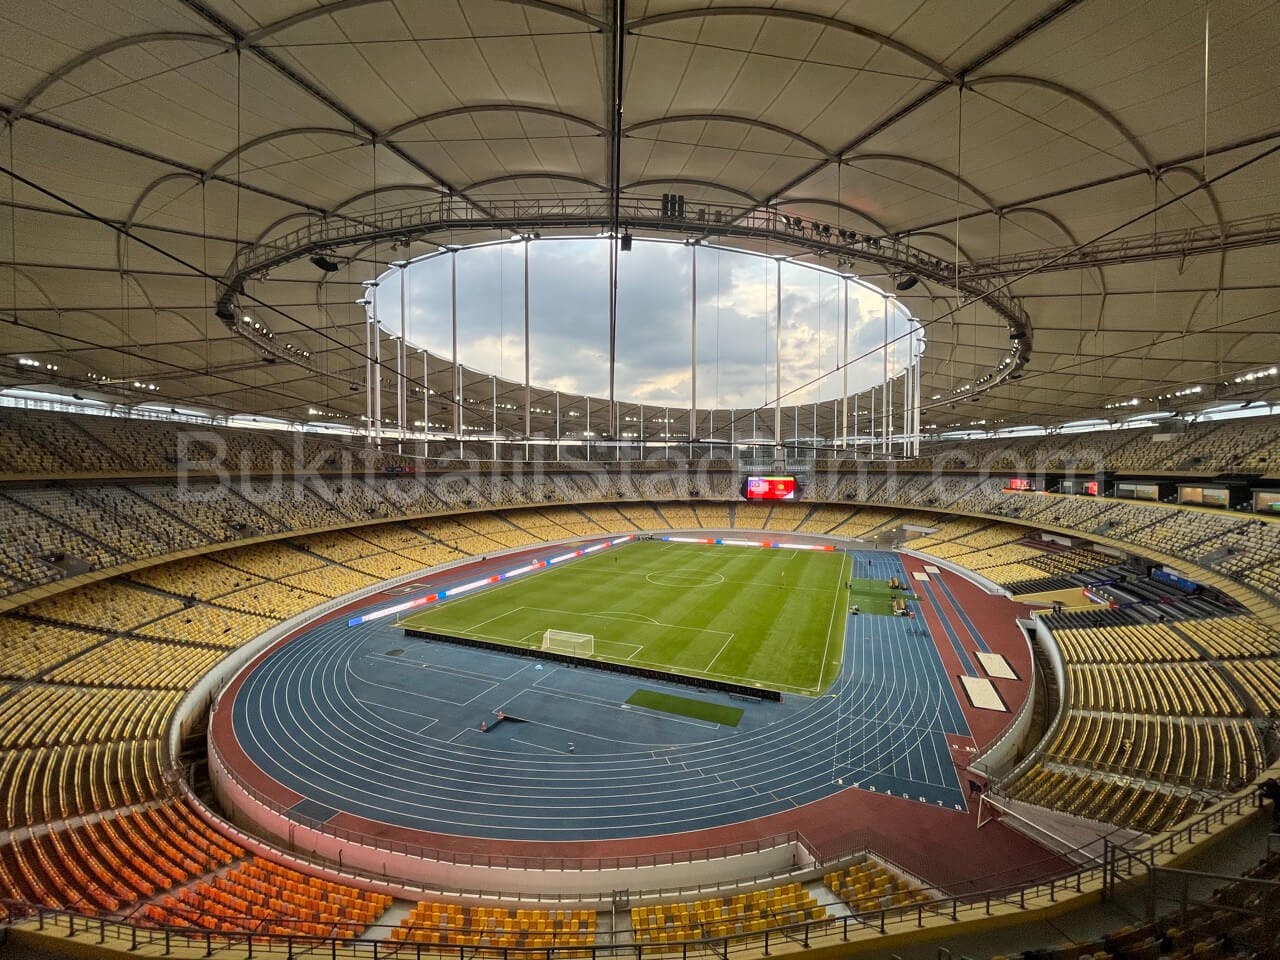 0.5x View of Bukit Jalil field from section 304 of Stadium Bukit Jalil.